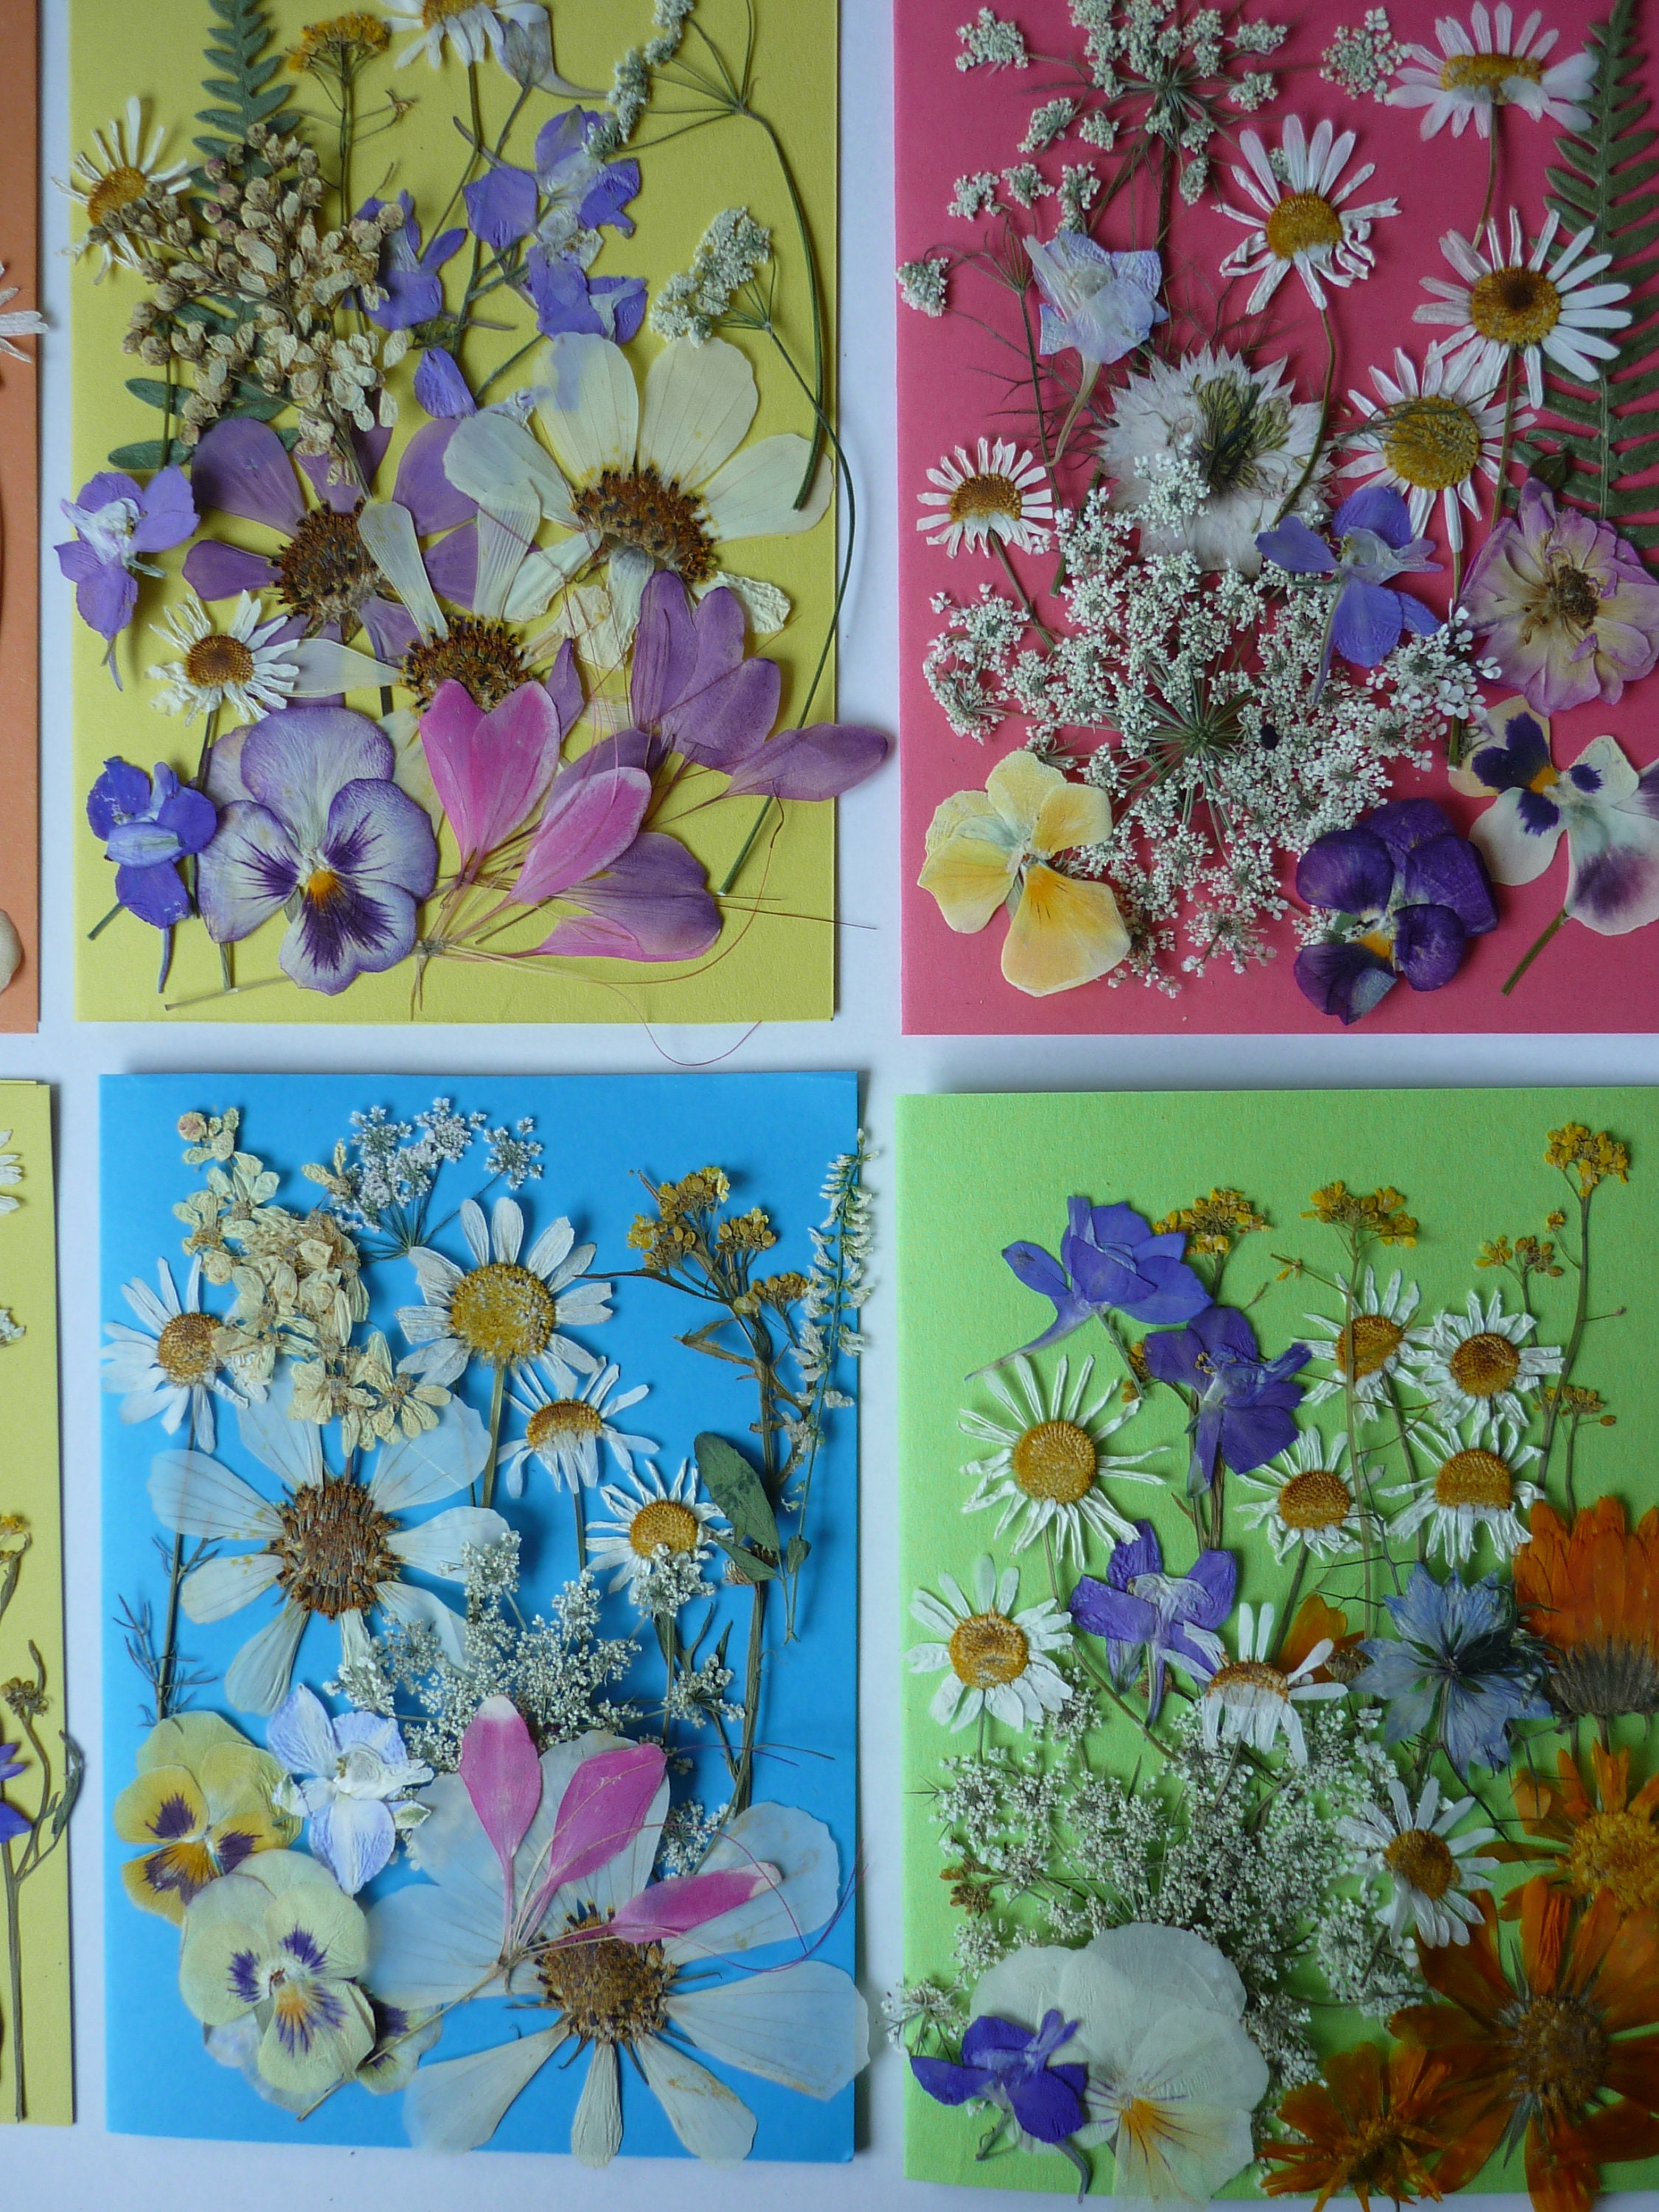 Dried Pressed Flowers For Crafts - Pressed Flowers Mix Pack - Dry Pres –  DOMEDBAZAAR